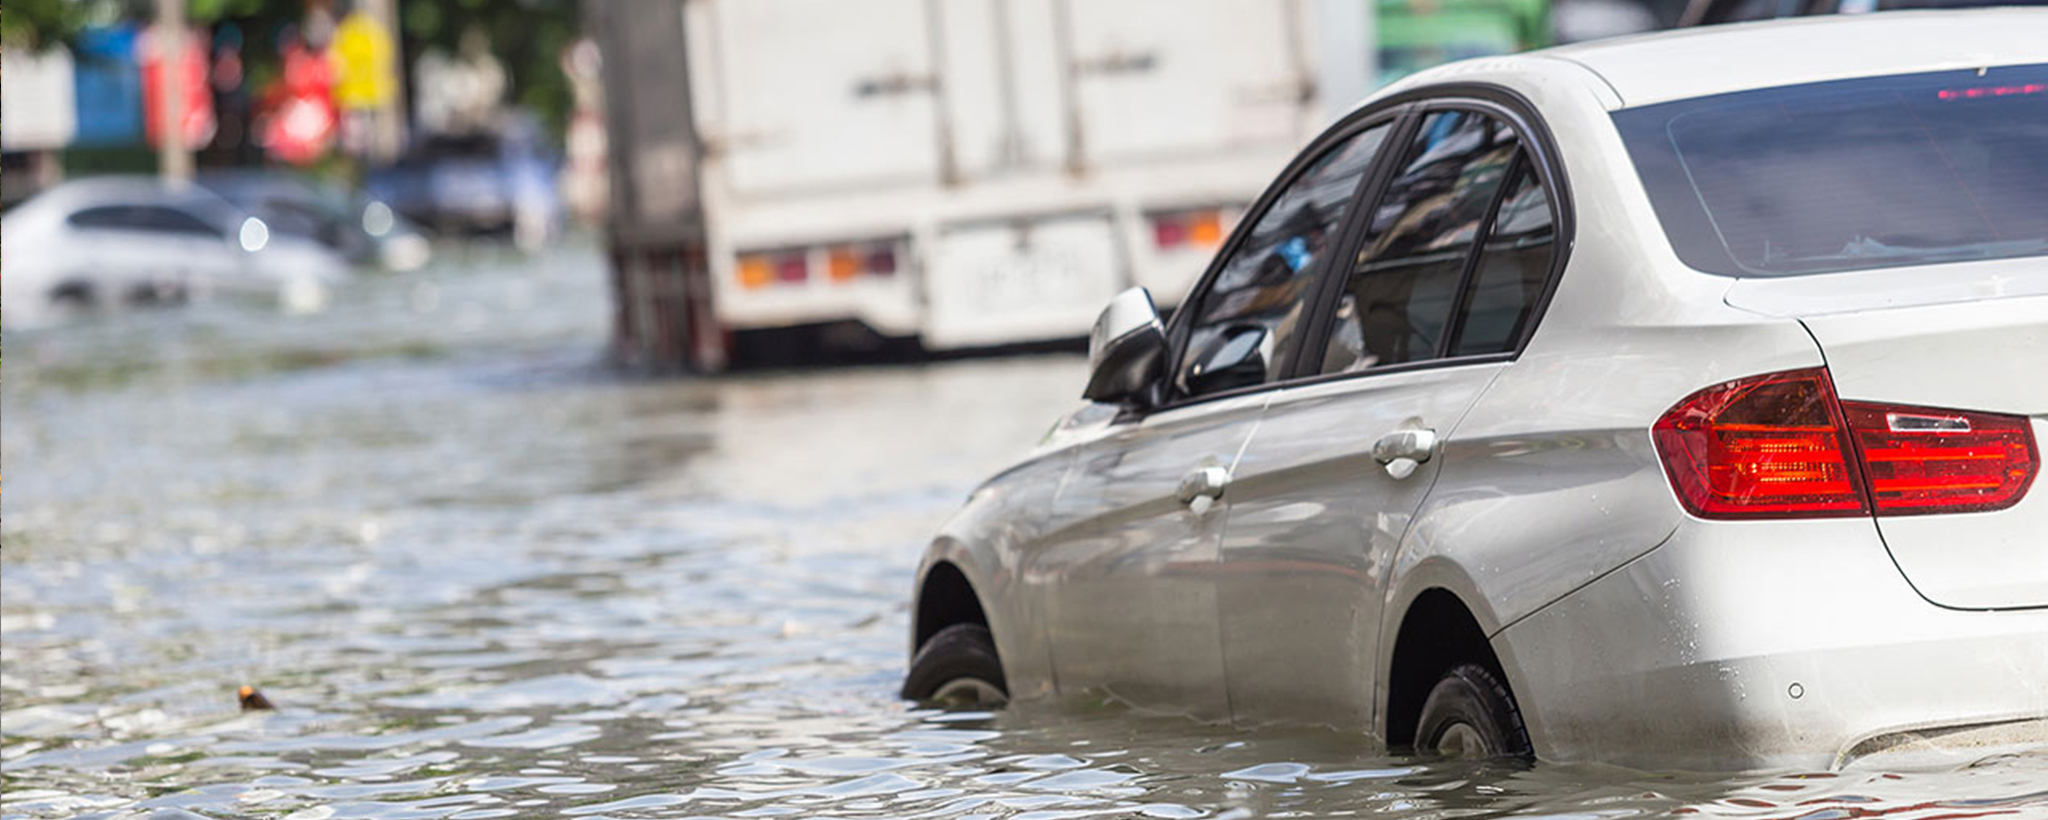 Cars floating in flood water